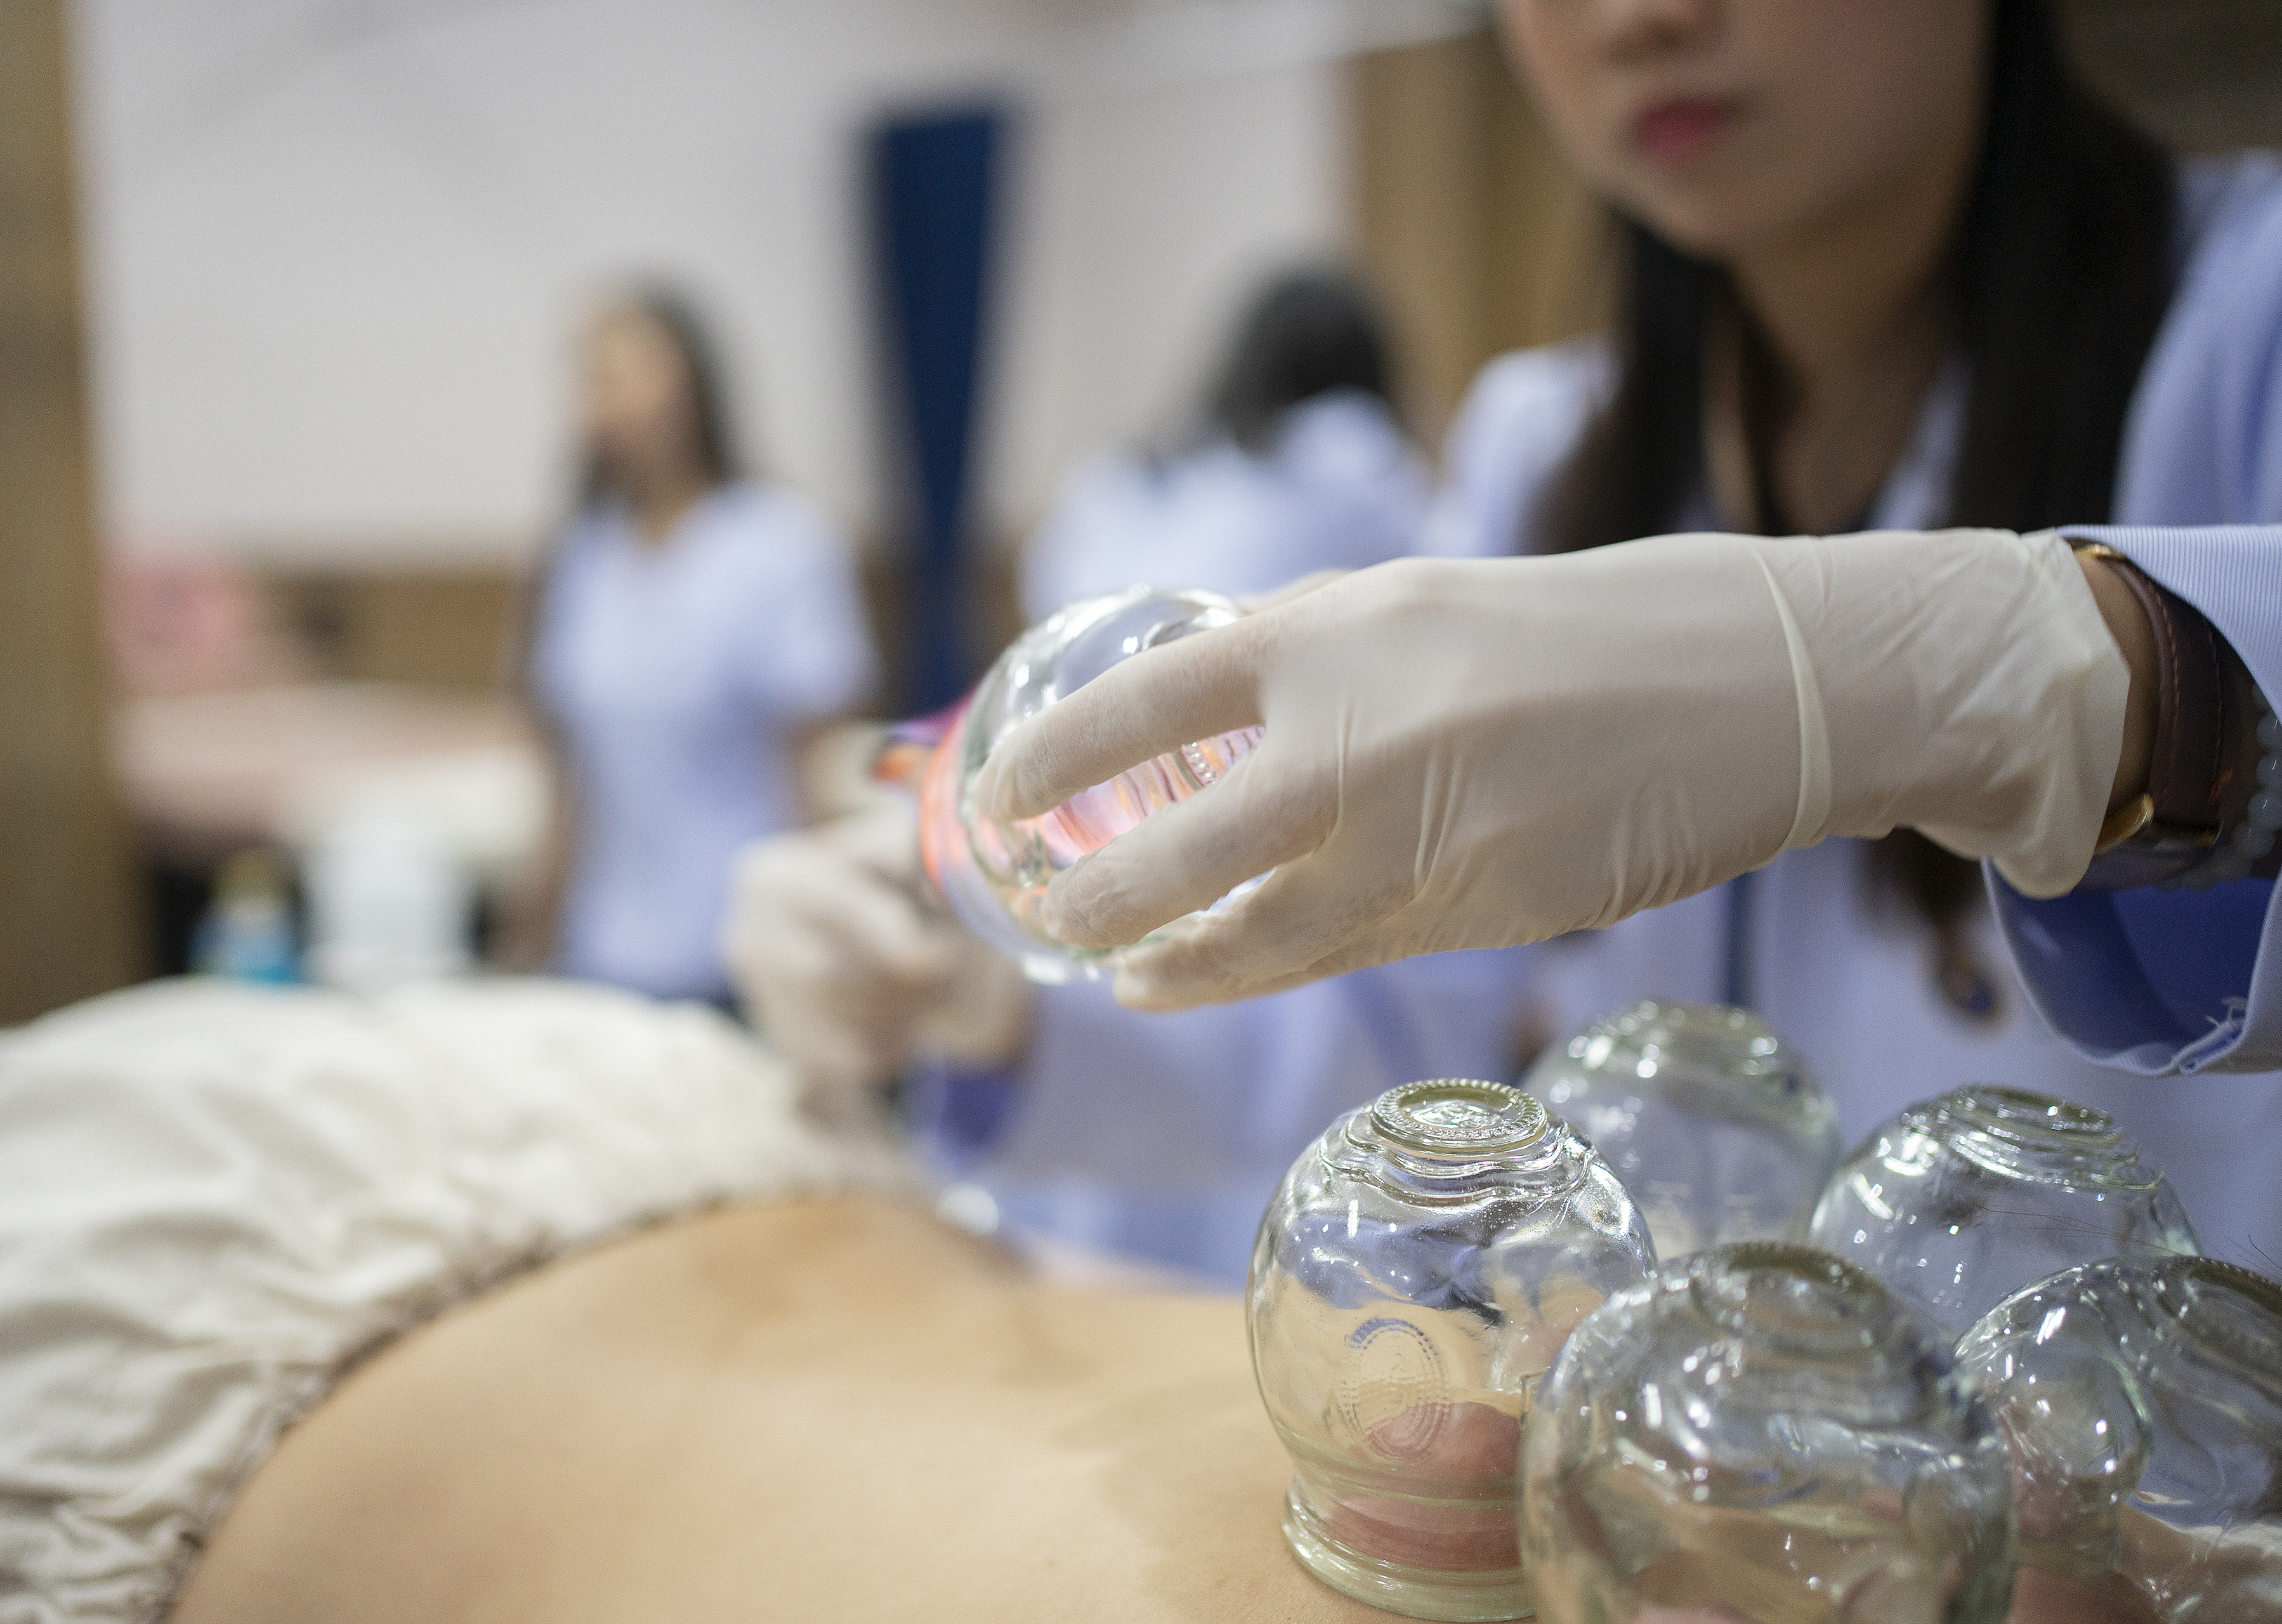 Cupping therapy in traditional Chinese medicine. /CFP